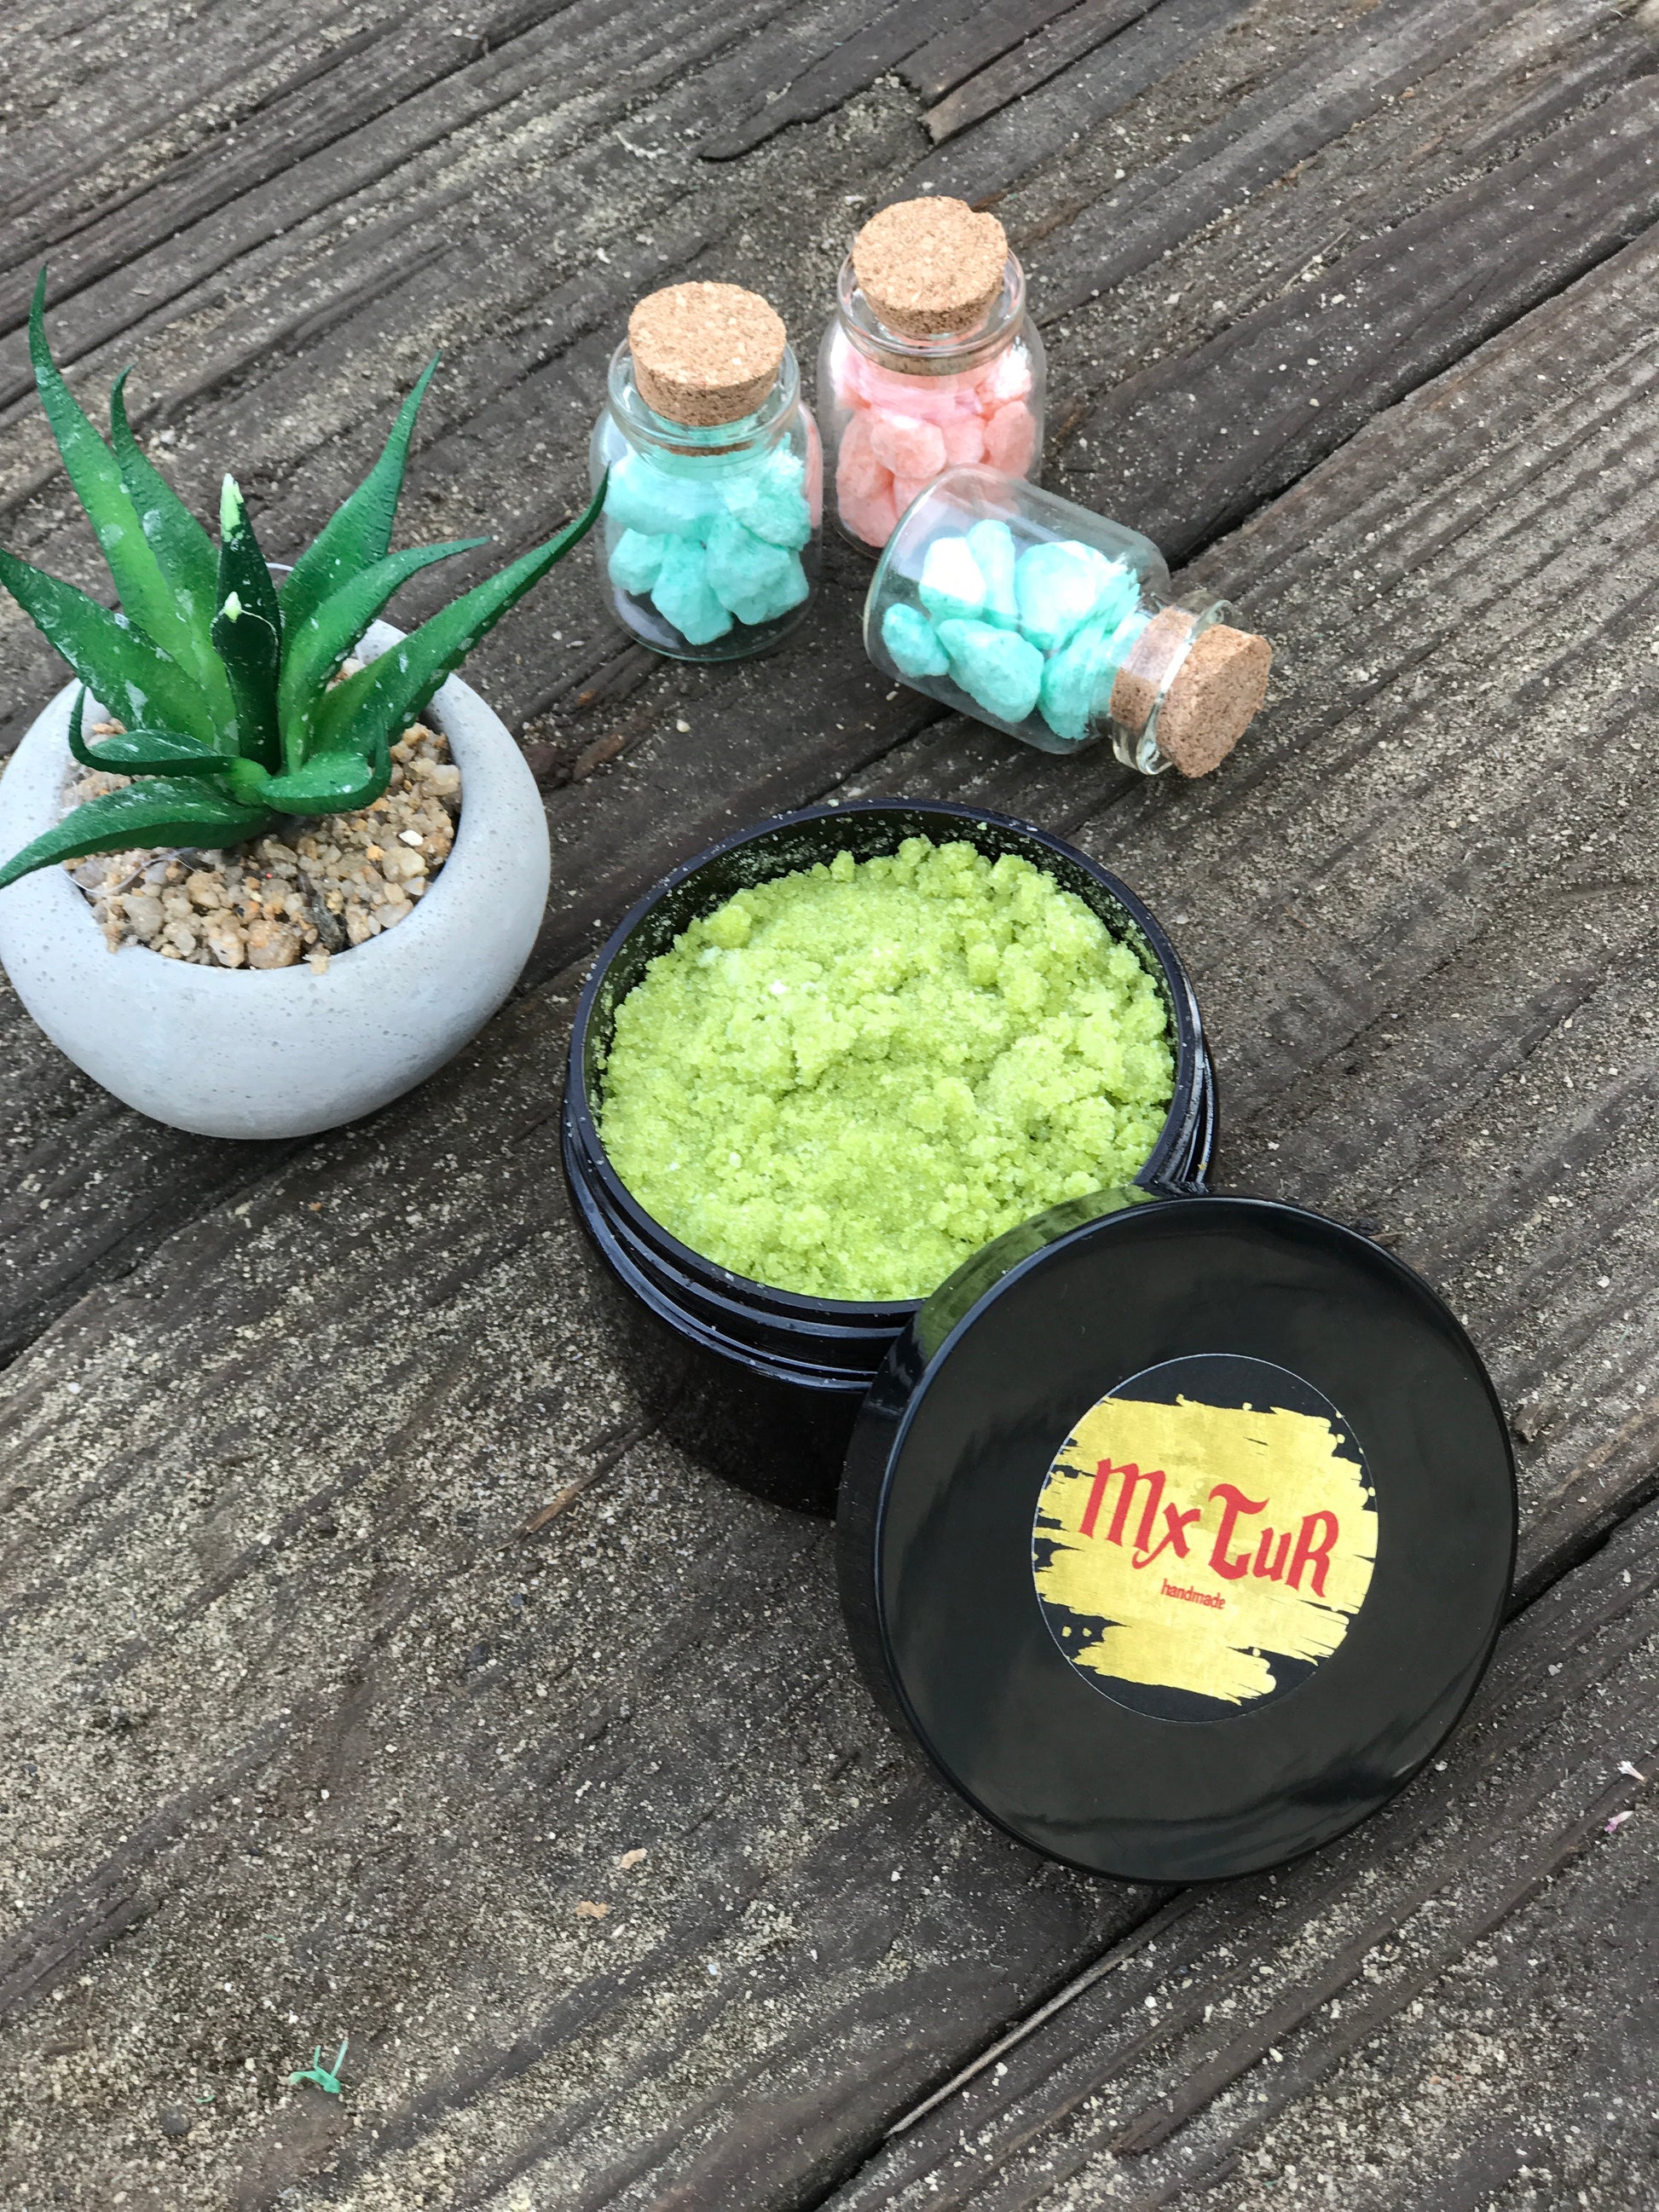 Matcha Face & Body Scrub -Mixtur,  Matcha Face & Body Scrub Mxtur, Face & Body Scrub Masks, Scrubs, Soaps, Matcha Face & Body Scrub skincare, Matcha Face & Body Scrub natural, [product_Type] Handcrafted